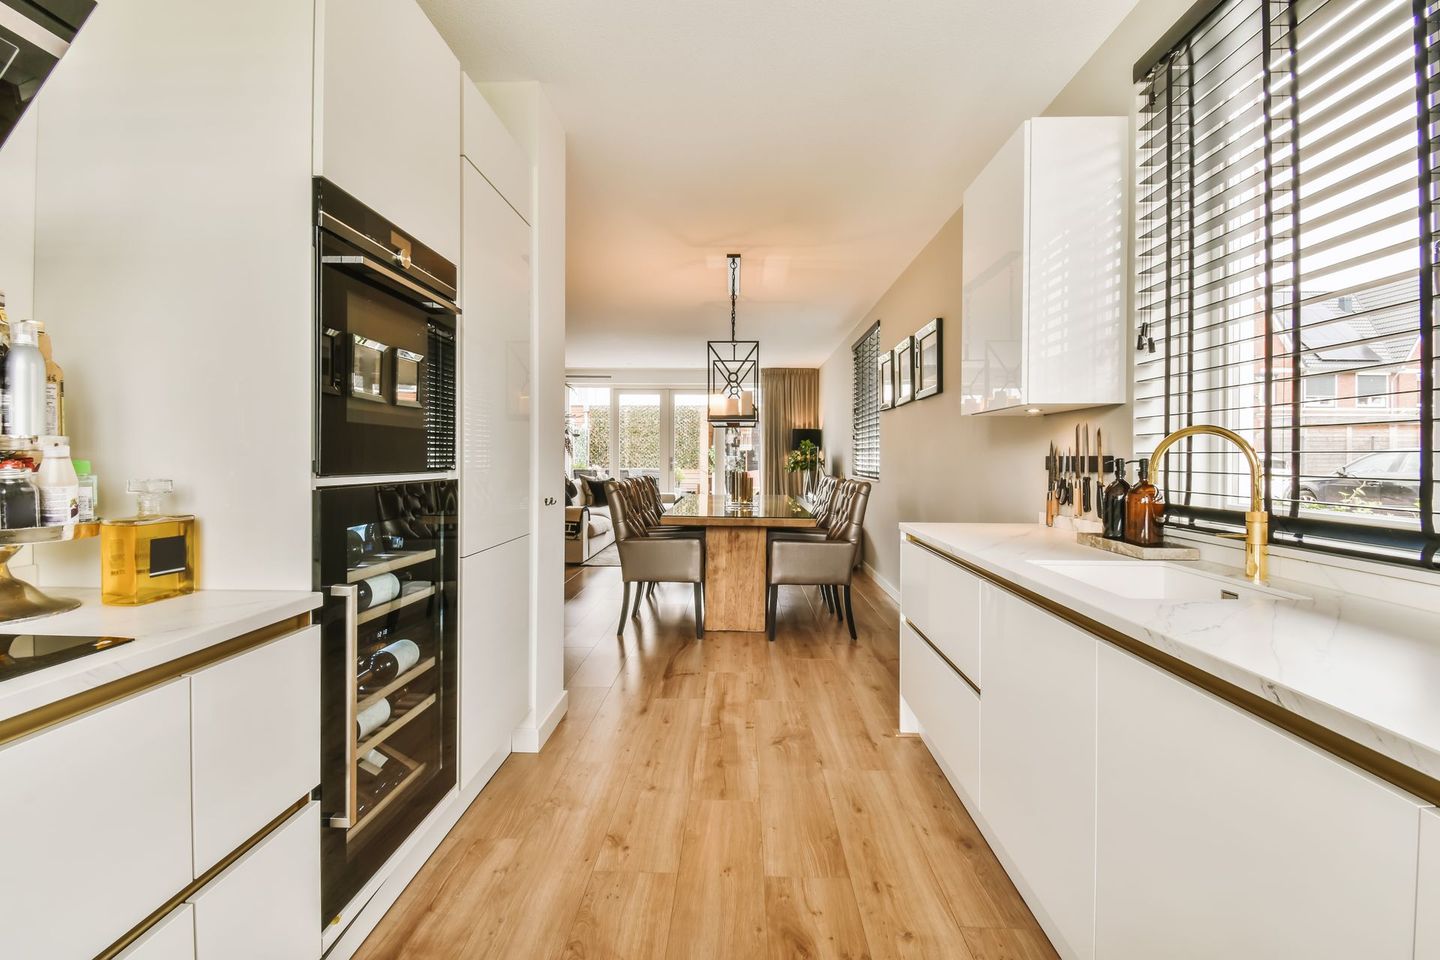 A kitchen with wood flooring and white cabinets in the middle of the room